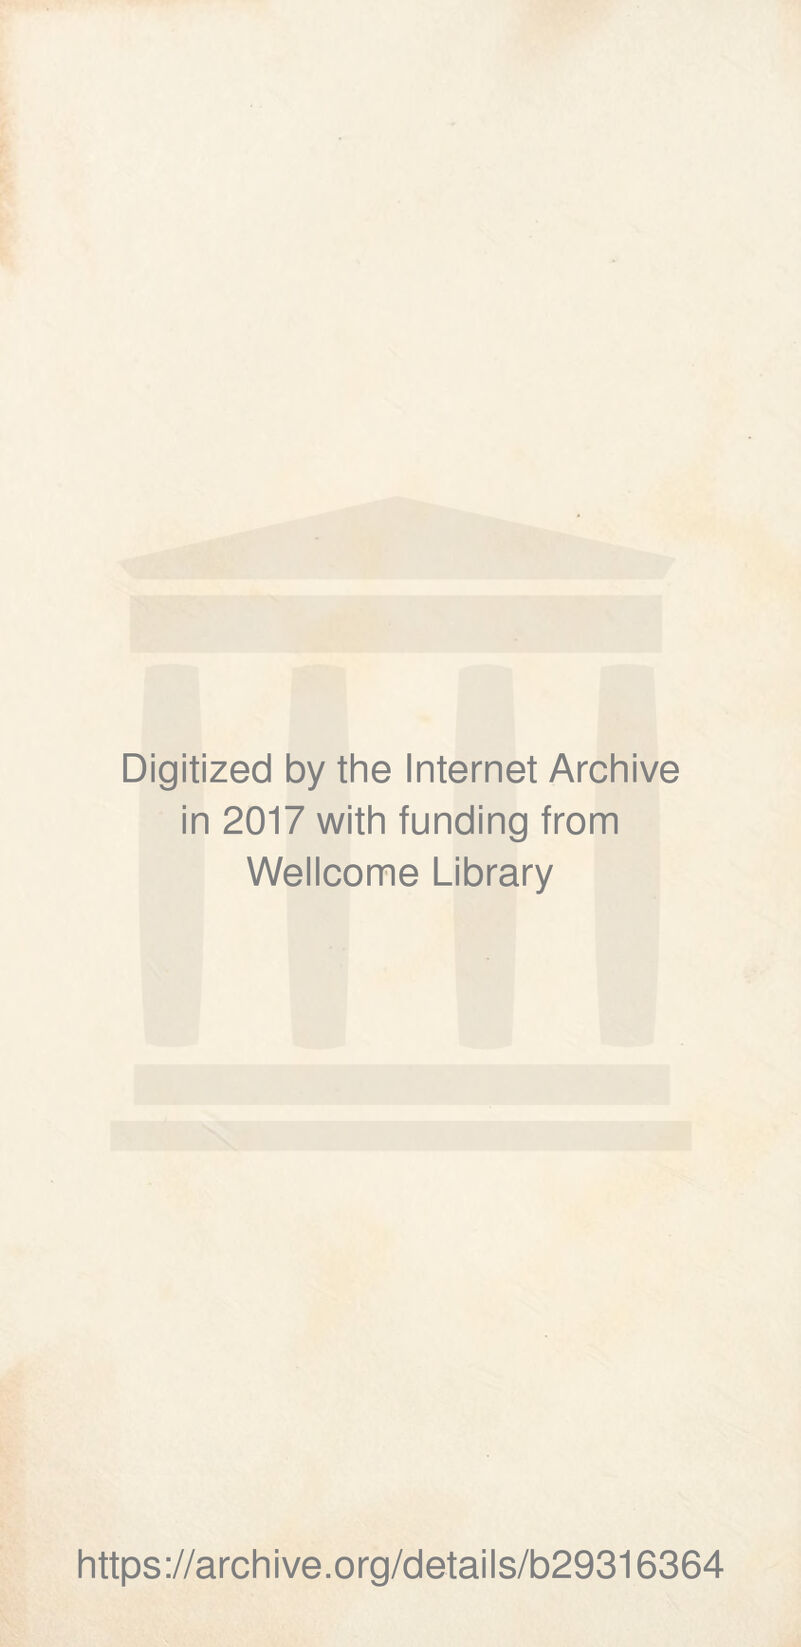 Digitized by the Internet Archive in 2017 with funding from Wellcome Library https://archive.org/details/b29316364